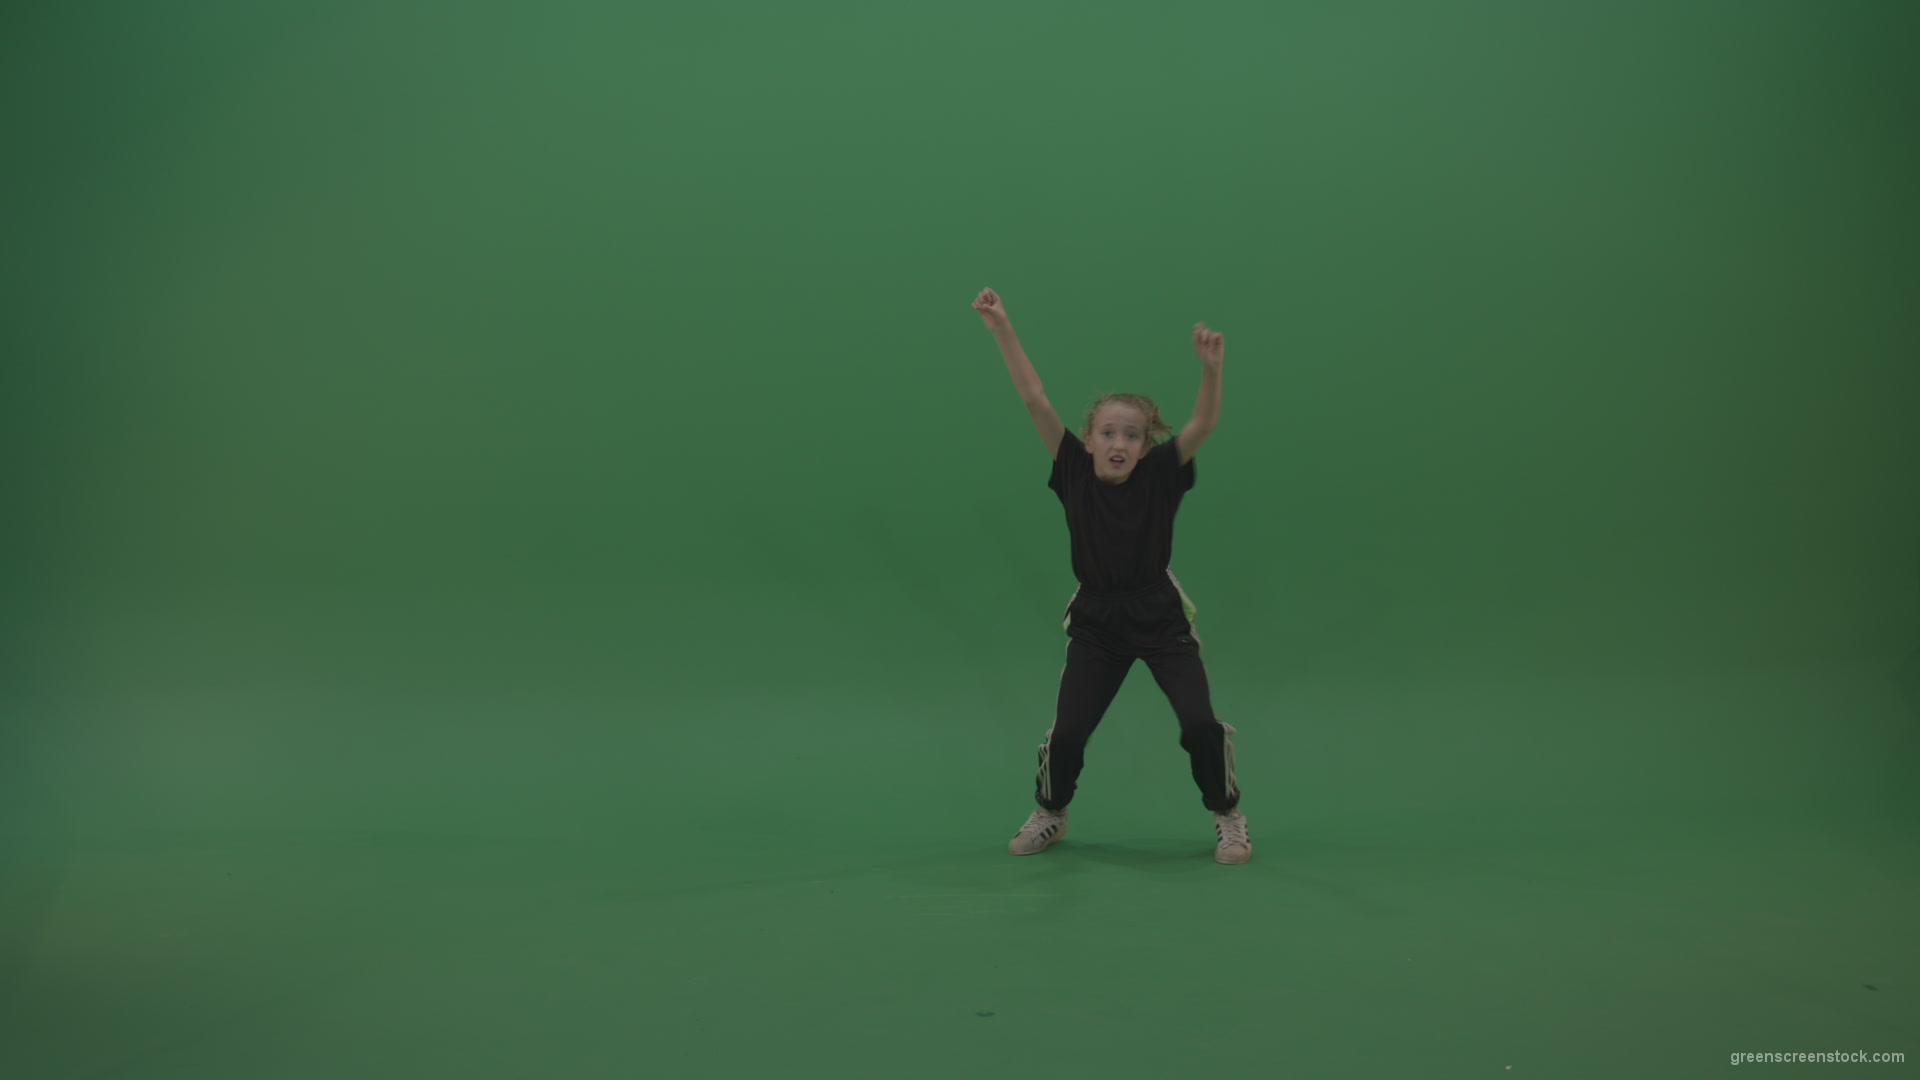 Incredible_Dance_Hip_Hop_Moves_From_Young_SmalKid_Female_Wearing_Black_Sweat_Suite_And_White_Trainers_On_Green_Screen_Wall_Background_008 Green Screen Stock